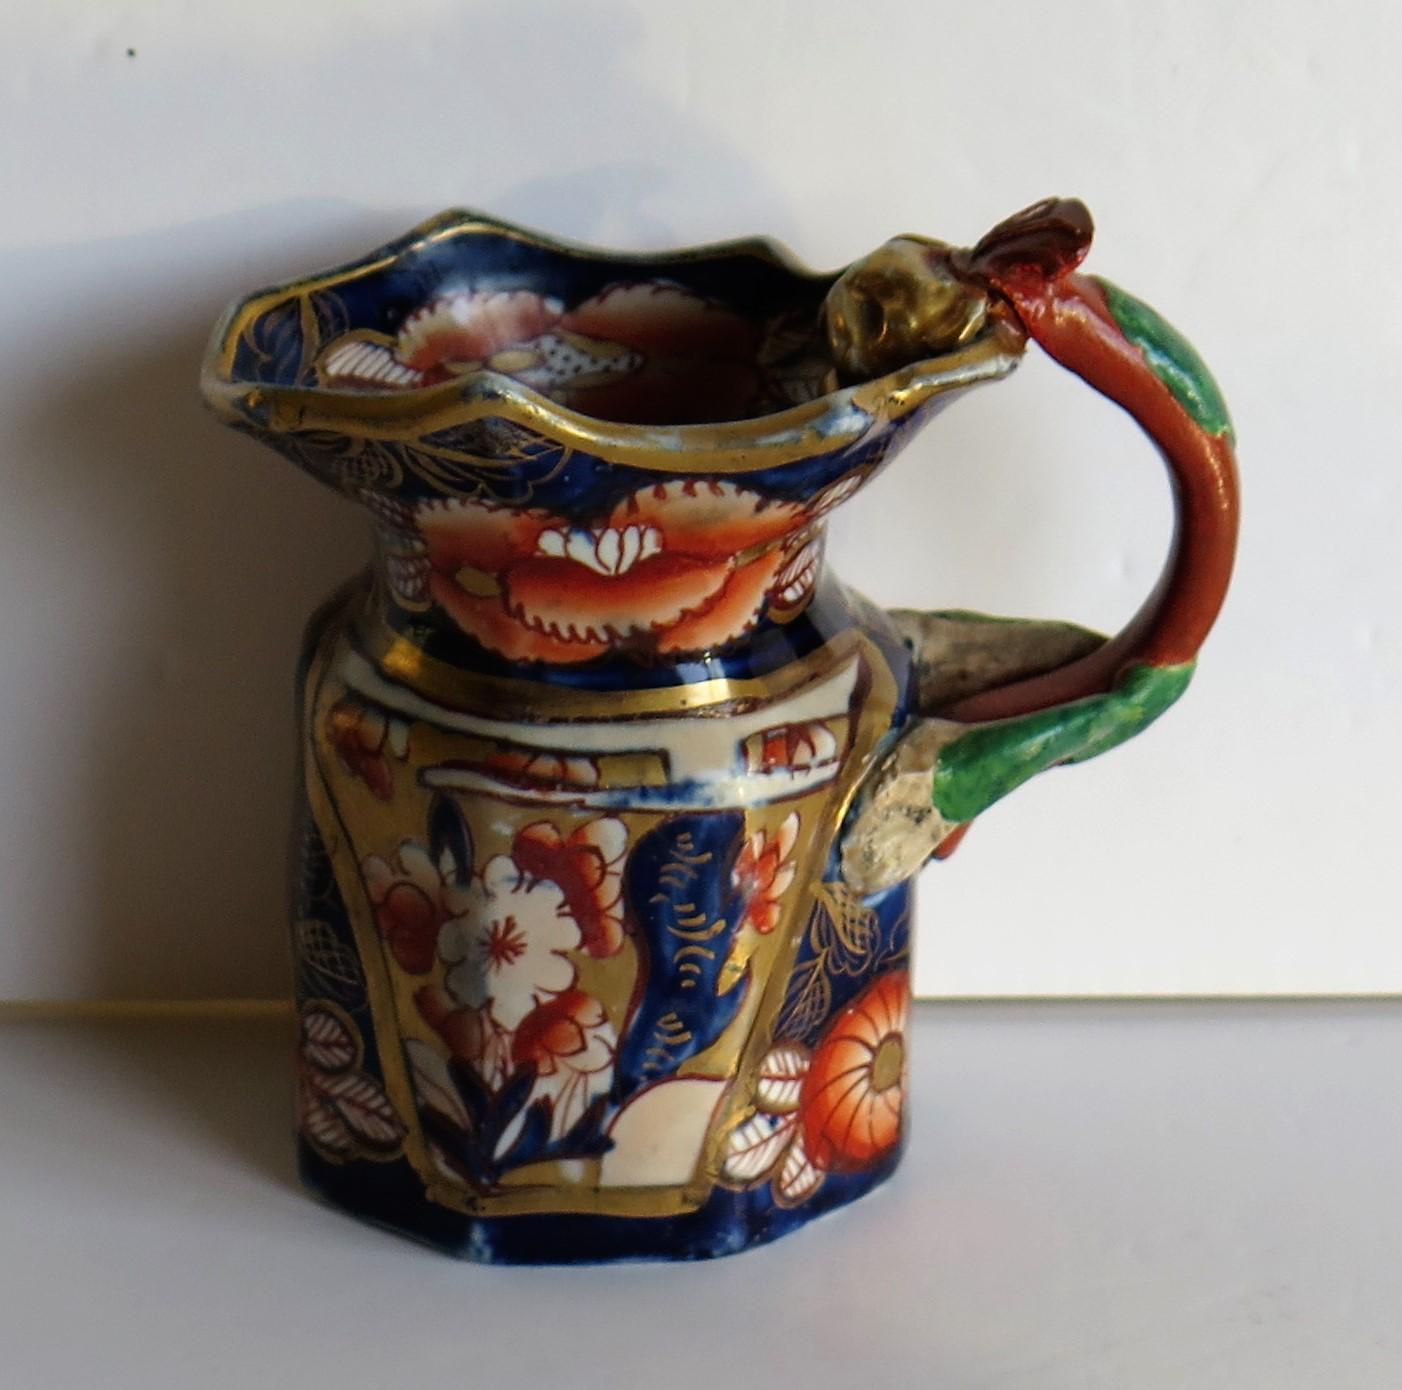 Hand-Painted Early Mason's Ironstone Cream Jug or Pitcher in School House Pattern, circa 1820